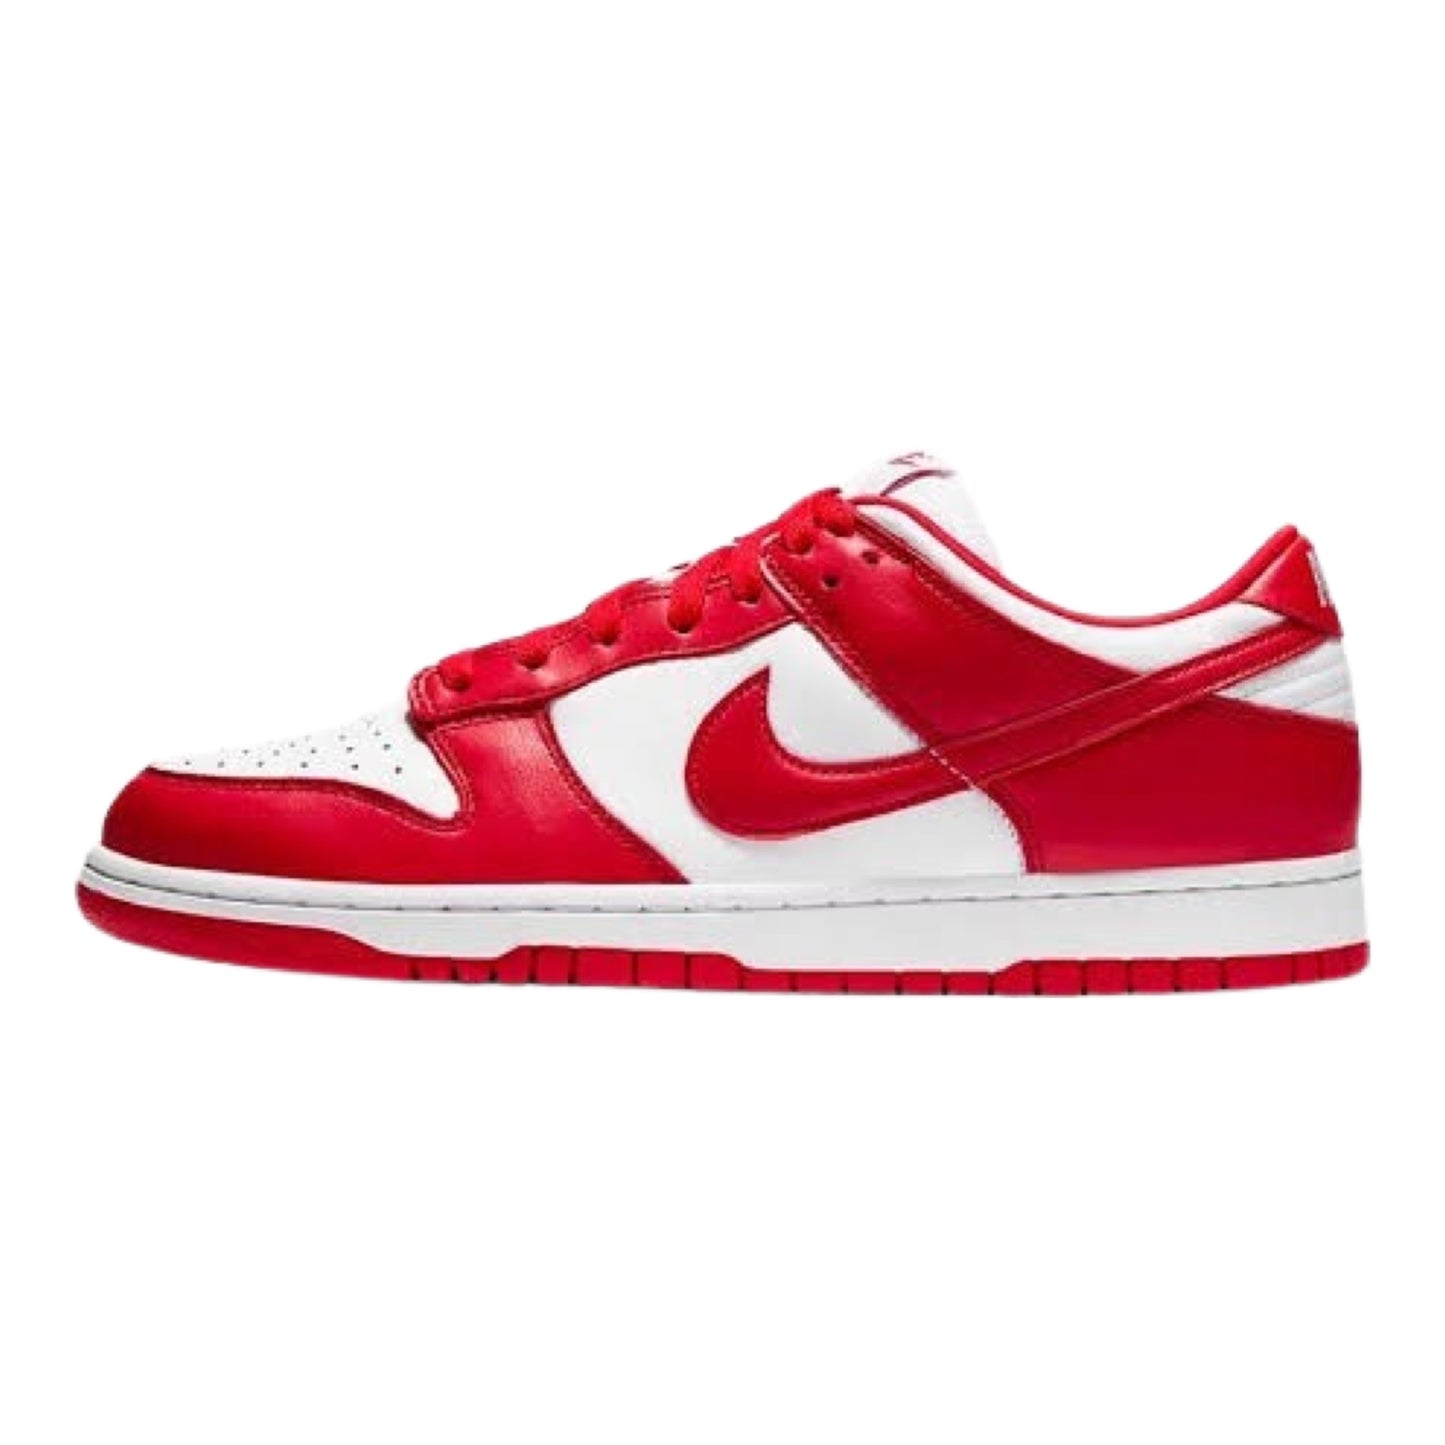 Nike Dunk Low “St Johns”